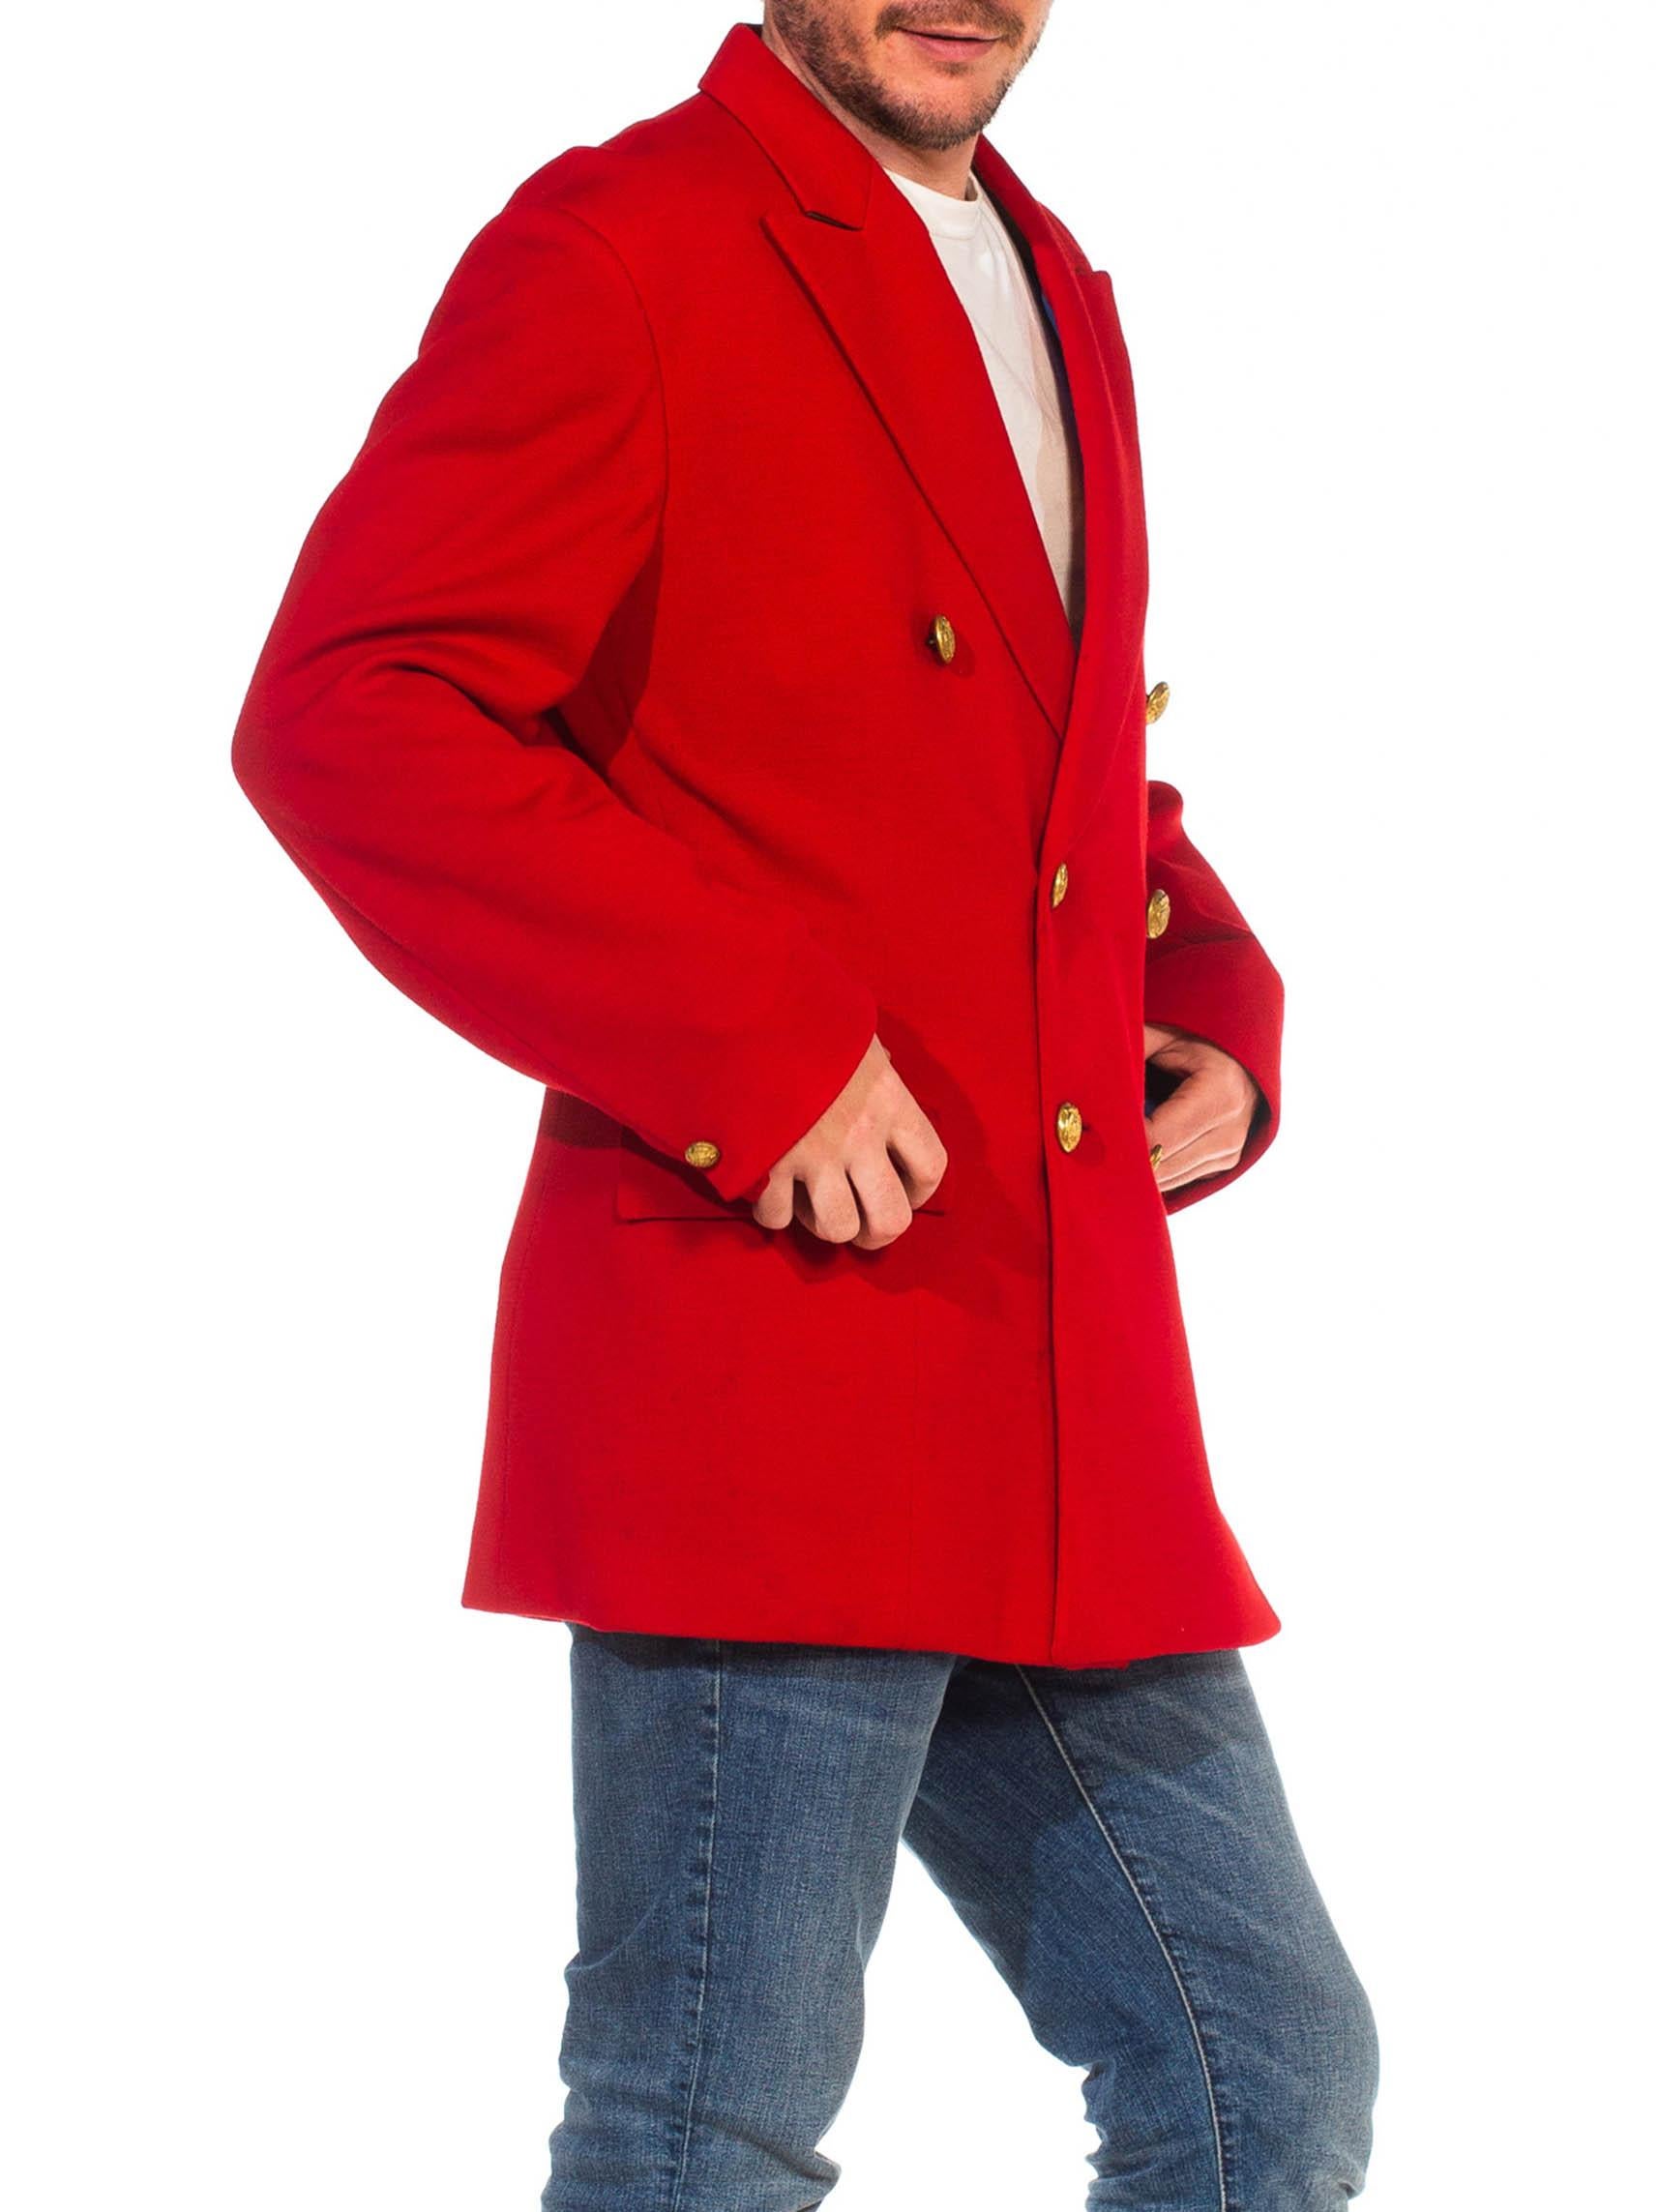 Men's 1960S Red Wool Jersey Double Breasted Peak Lapel Blazer  With Gold Heraldic But